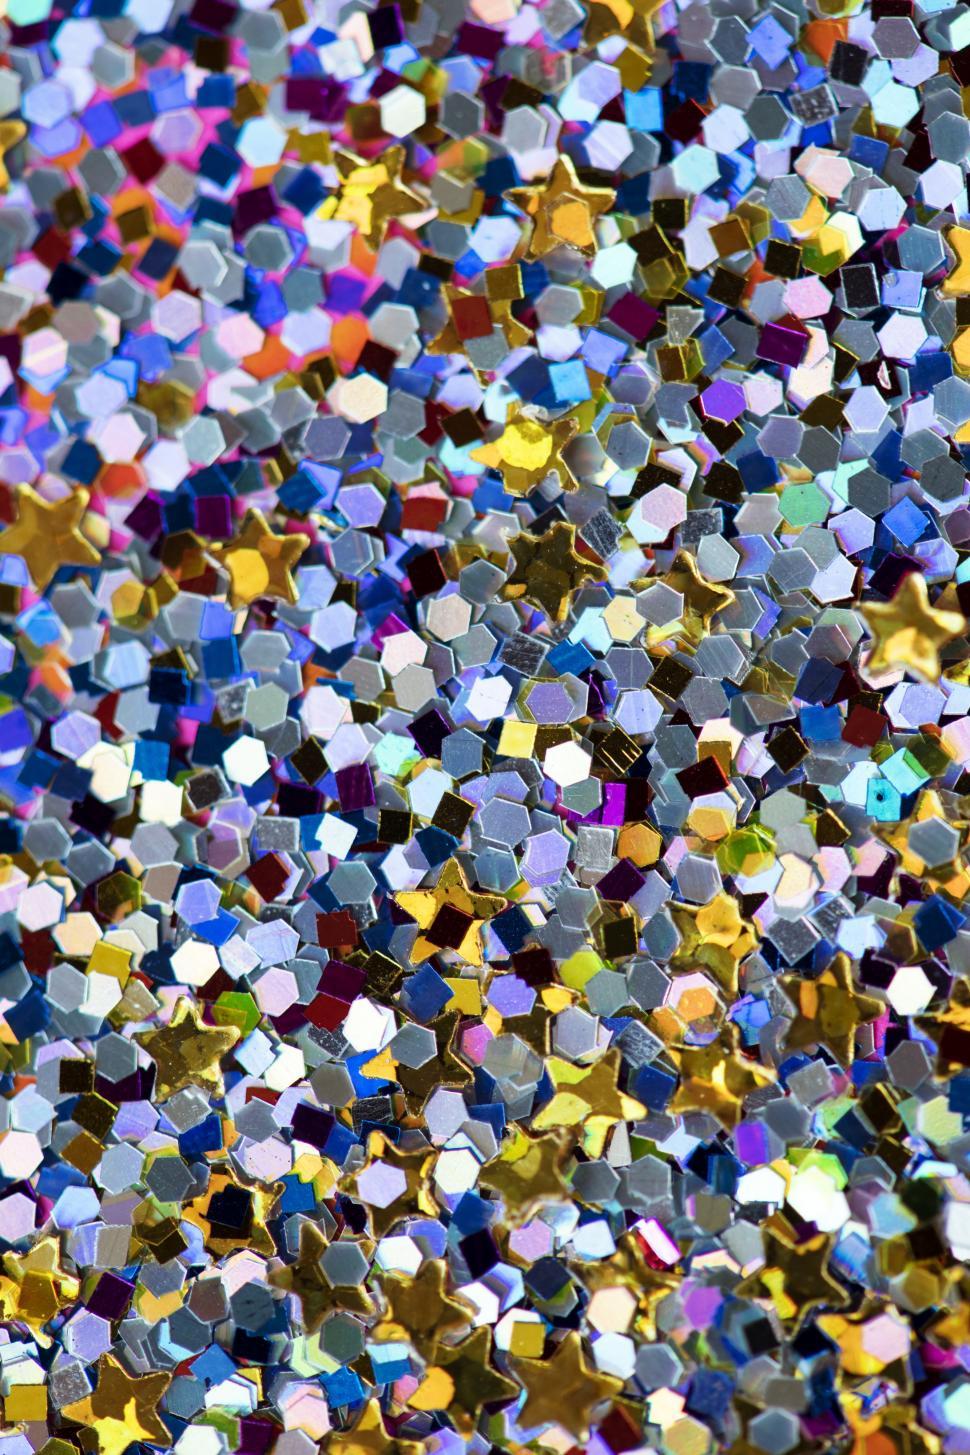 Free Image of Blue, yellow and violet hexagonal and star shaped glass glitter sparkles 